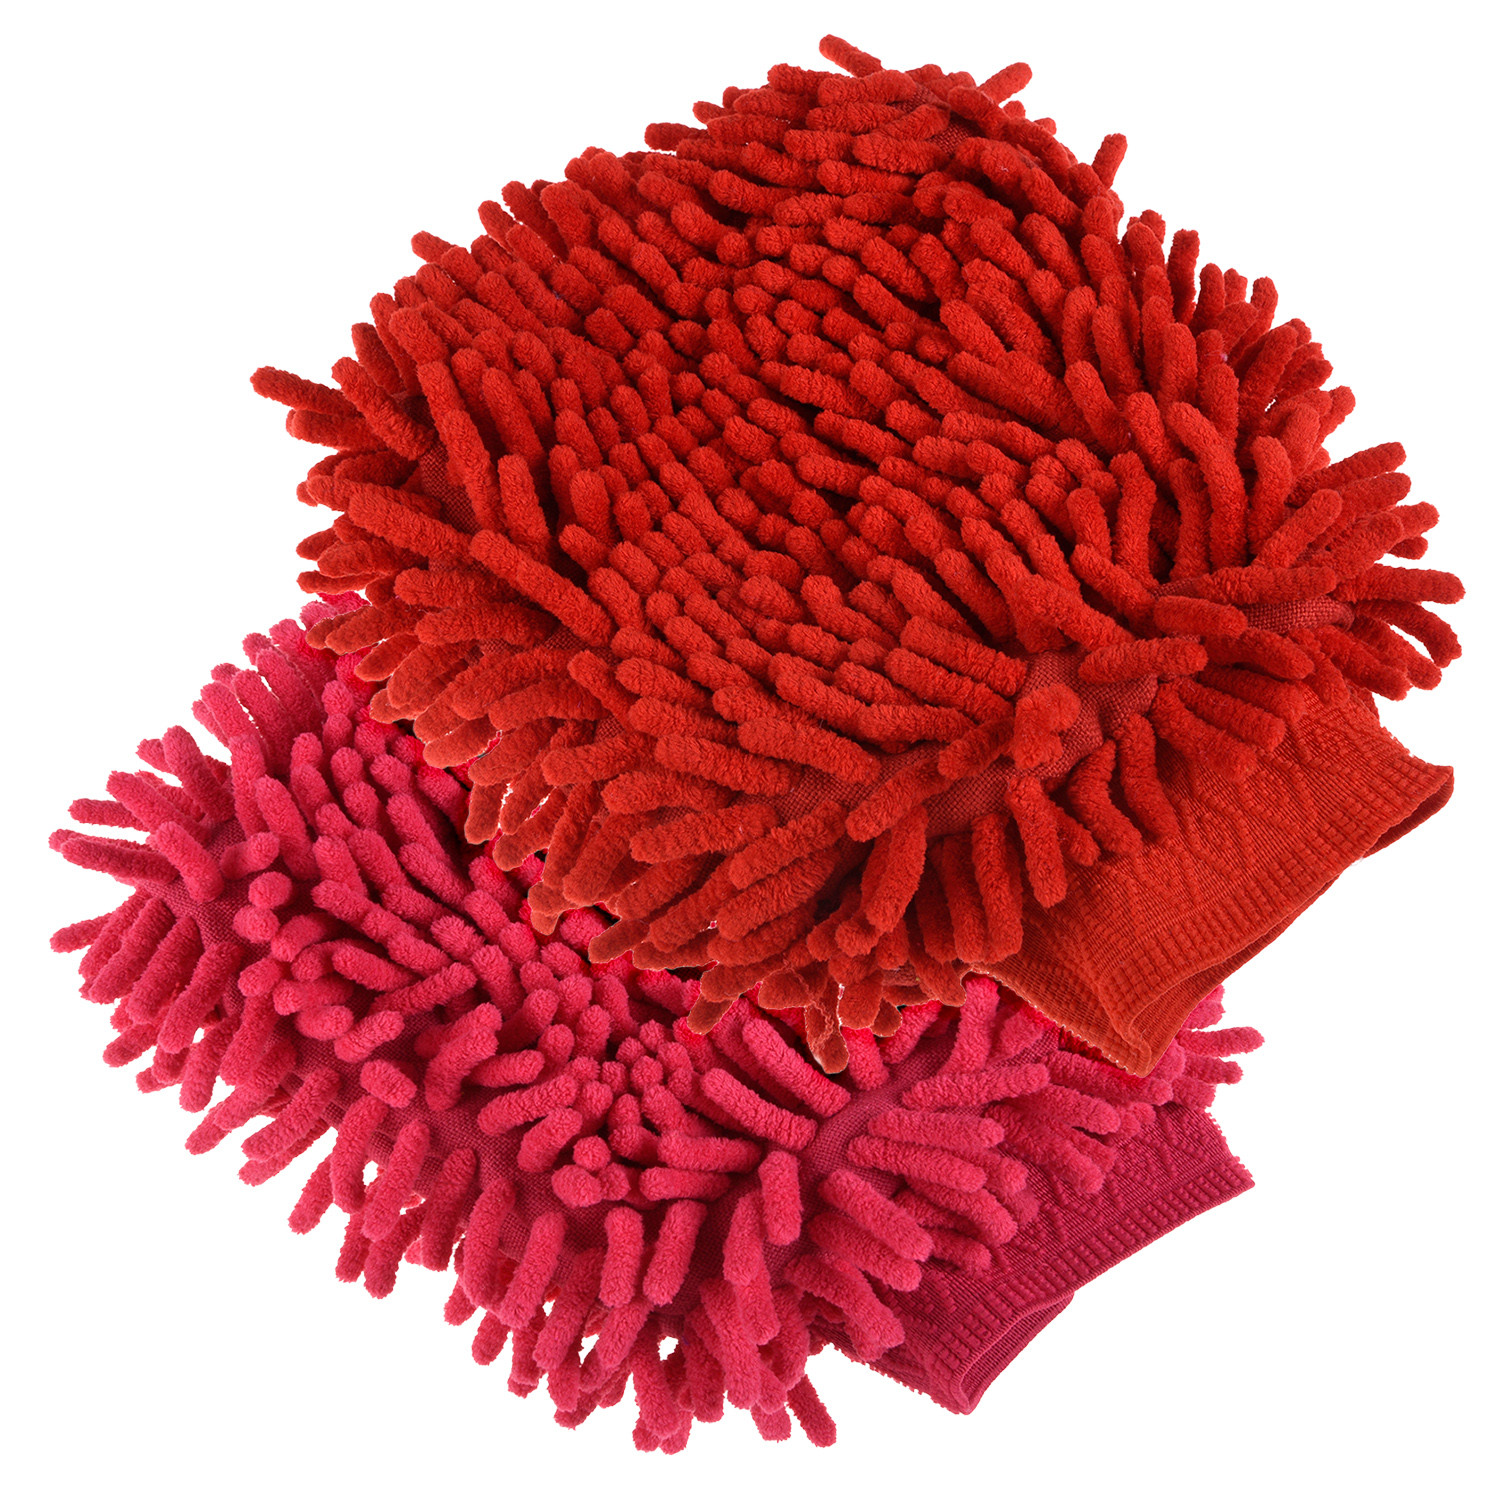 Kuber Industries Chenille Mitts|Microfiber Cleaning Gloves|Inside Waterproof Cloth Gloves|100 Gram Weighted Hand Duster|Chenille Gloves For Car|Glass|Pack of 2 (Red & Dark Pink)